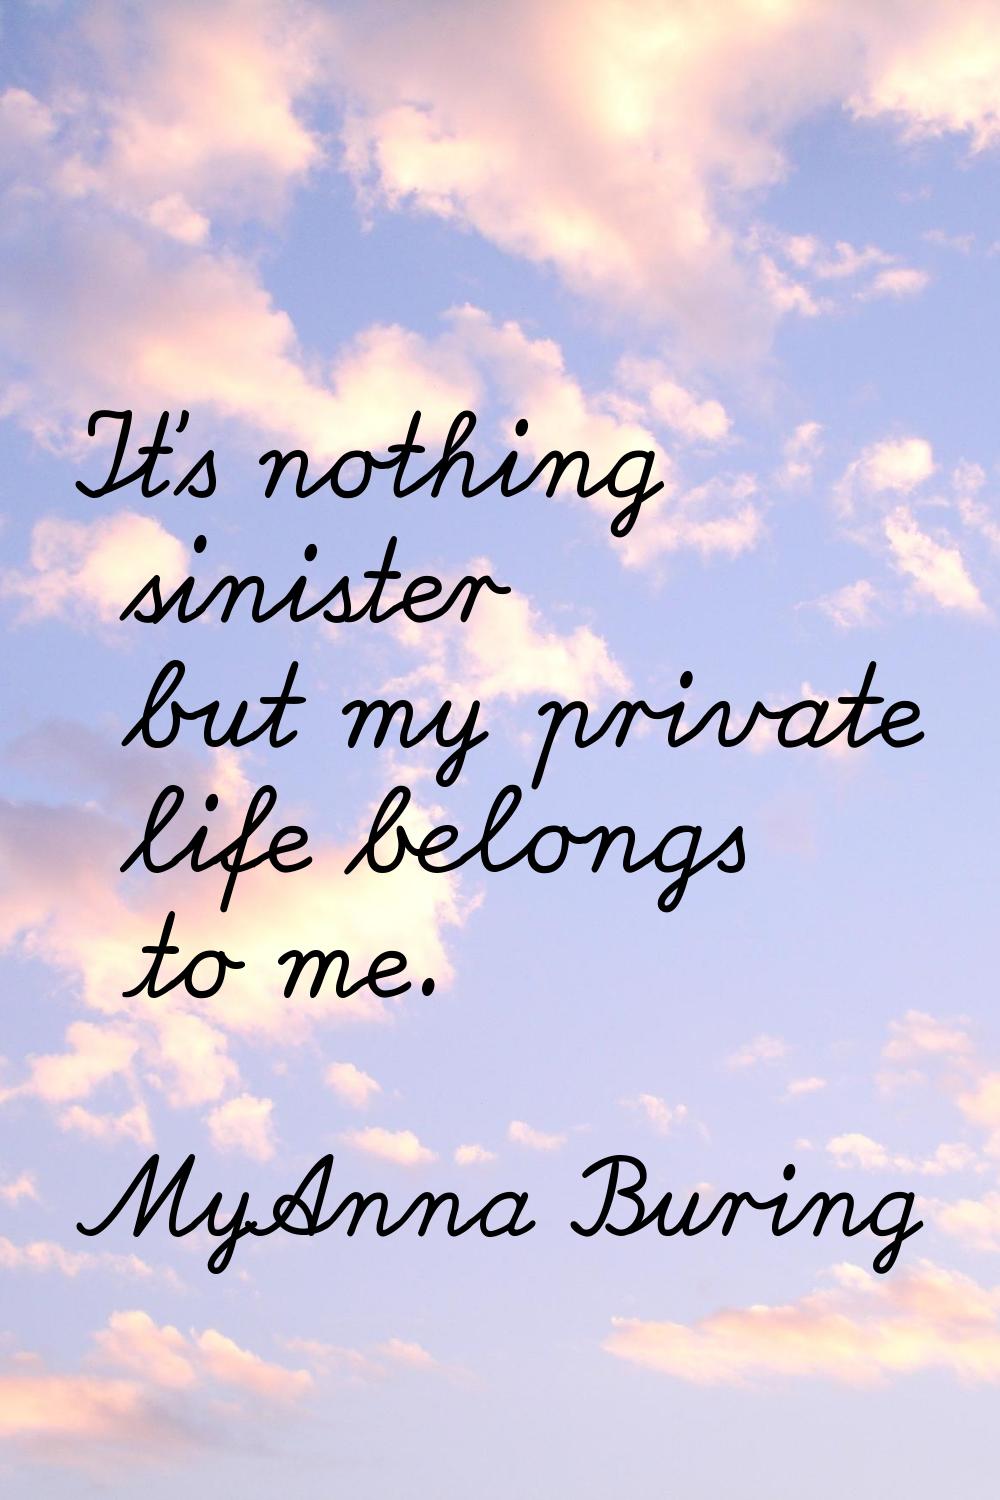 It's nothing sinister but my private life belongs to me.